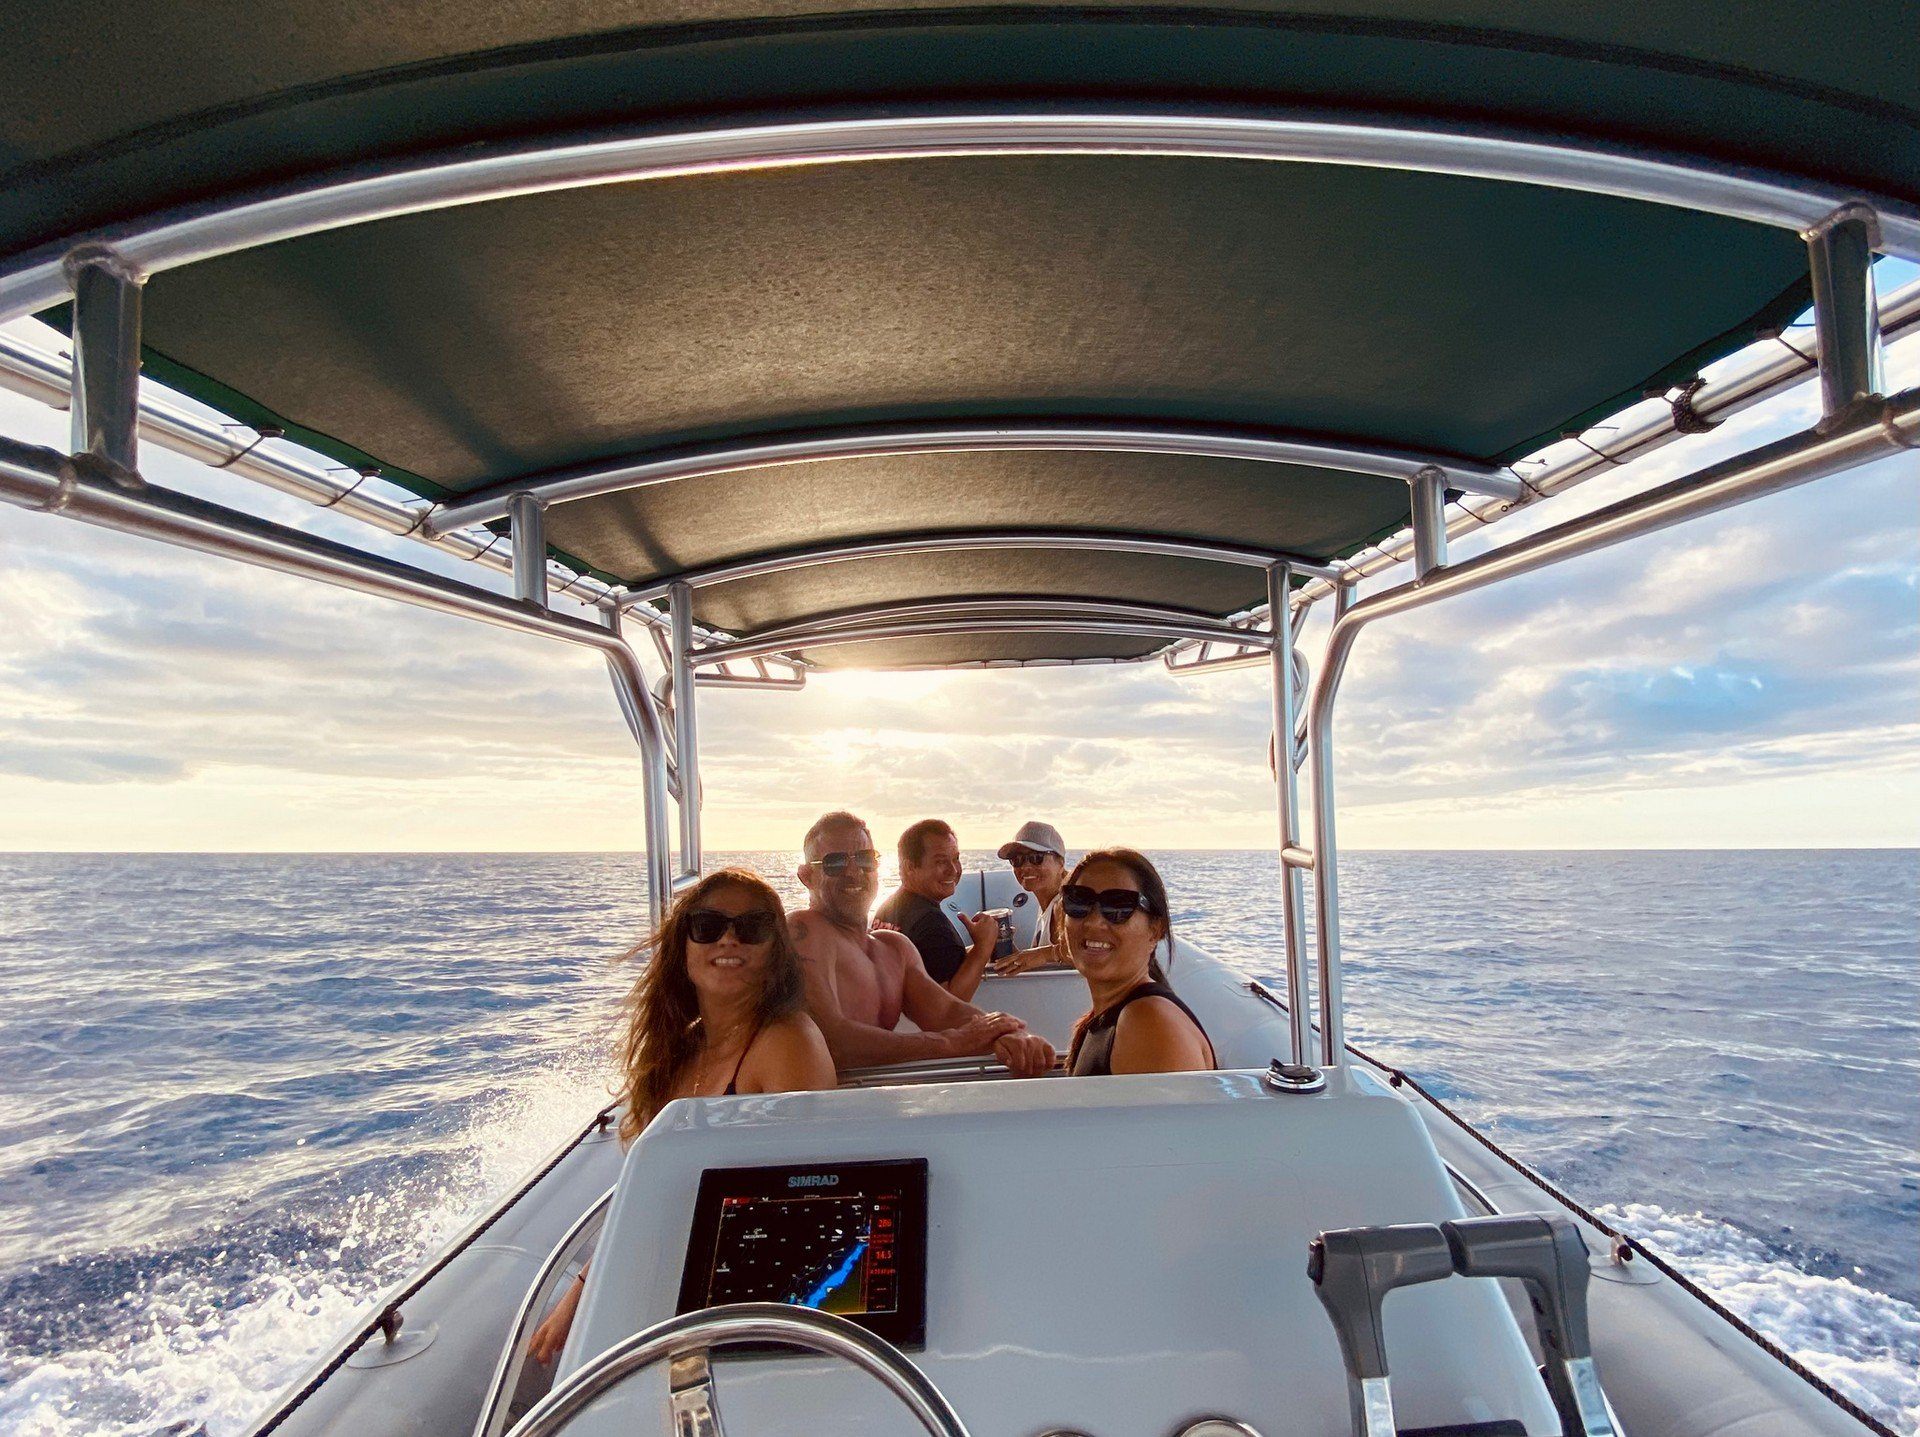 North Shore boat tours, Oahu shark tours, North Shore sightseeing tours.